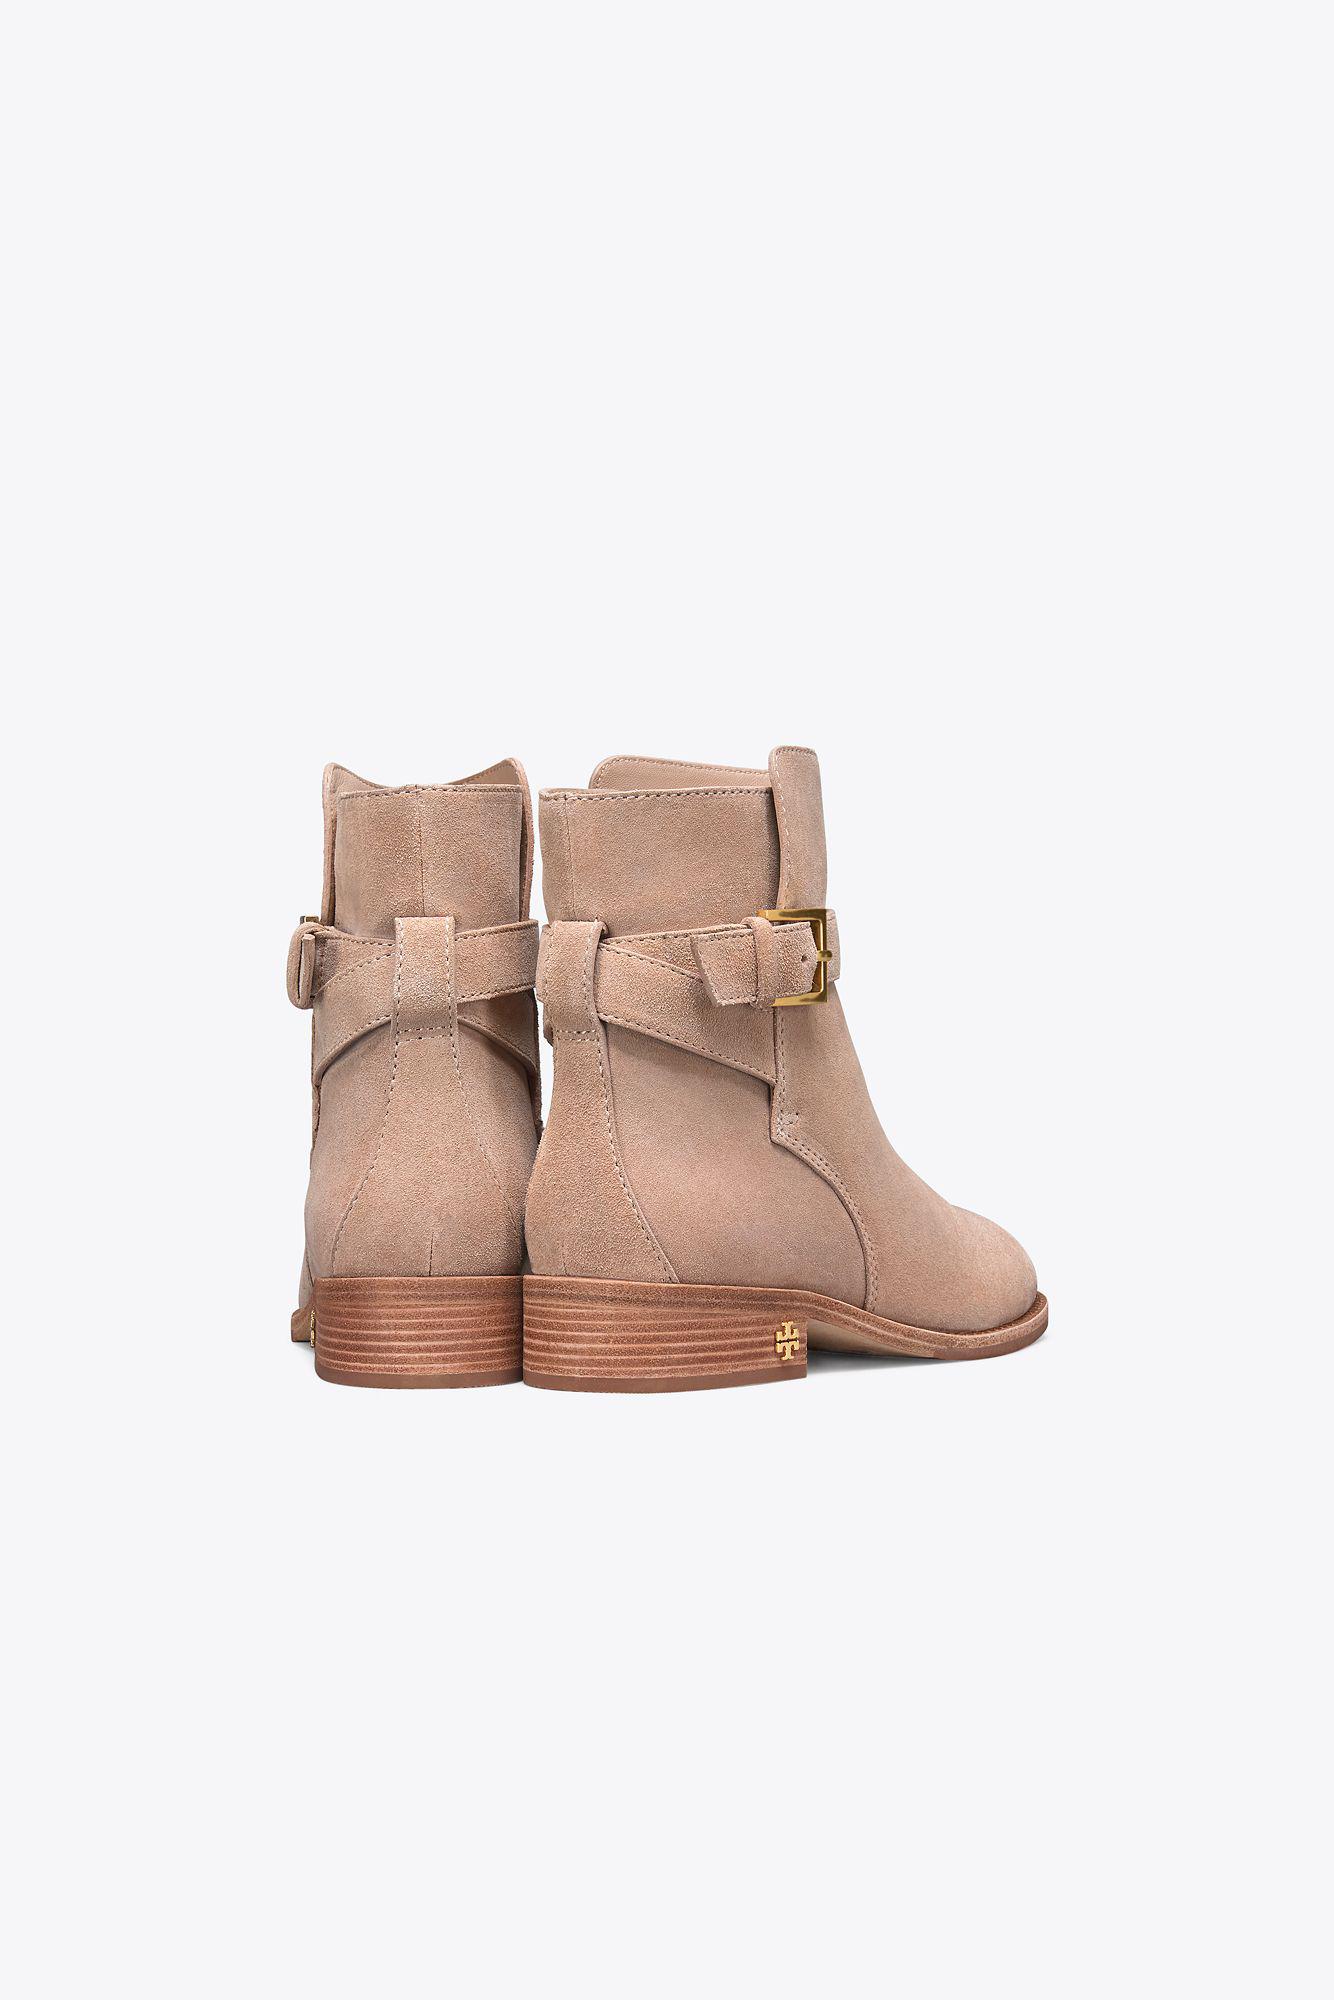 Tory Burch Brooke Ankle Bootie in Natural | Lyst Canada